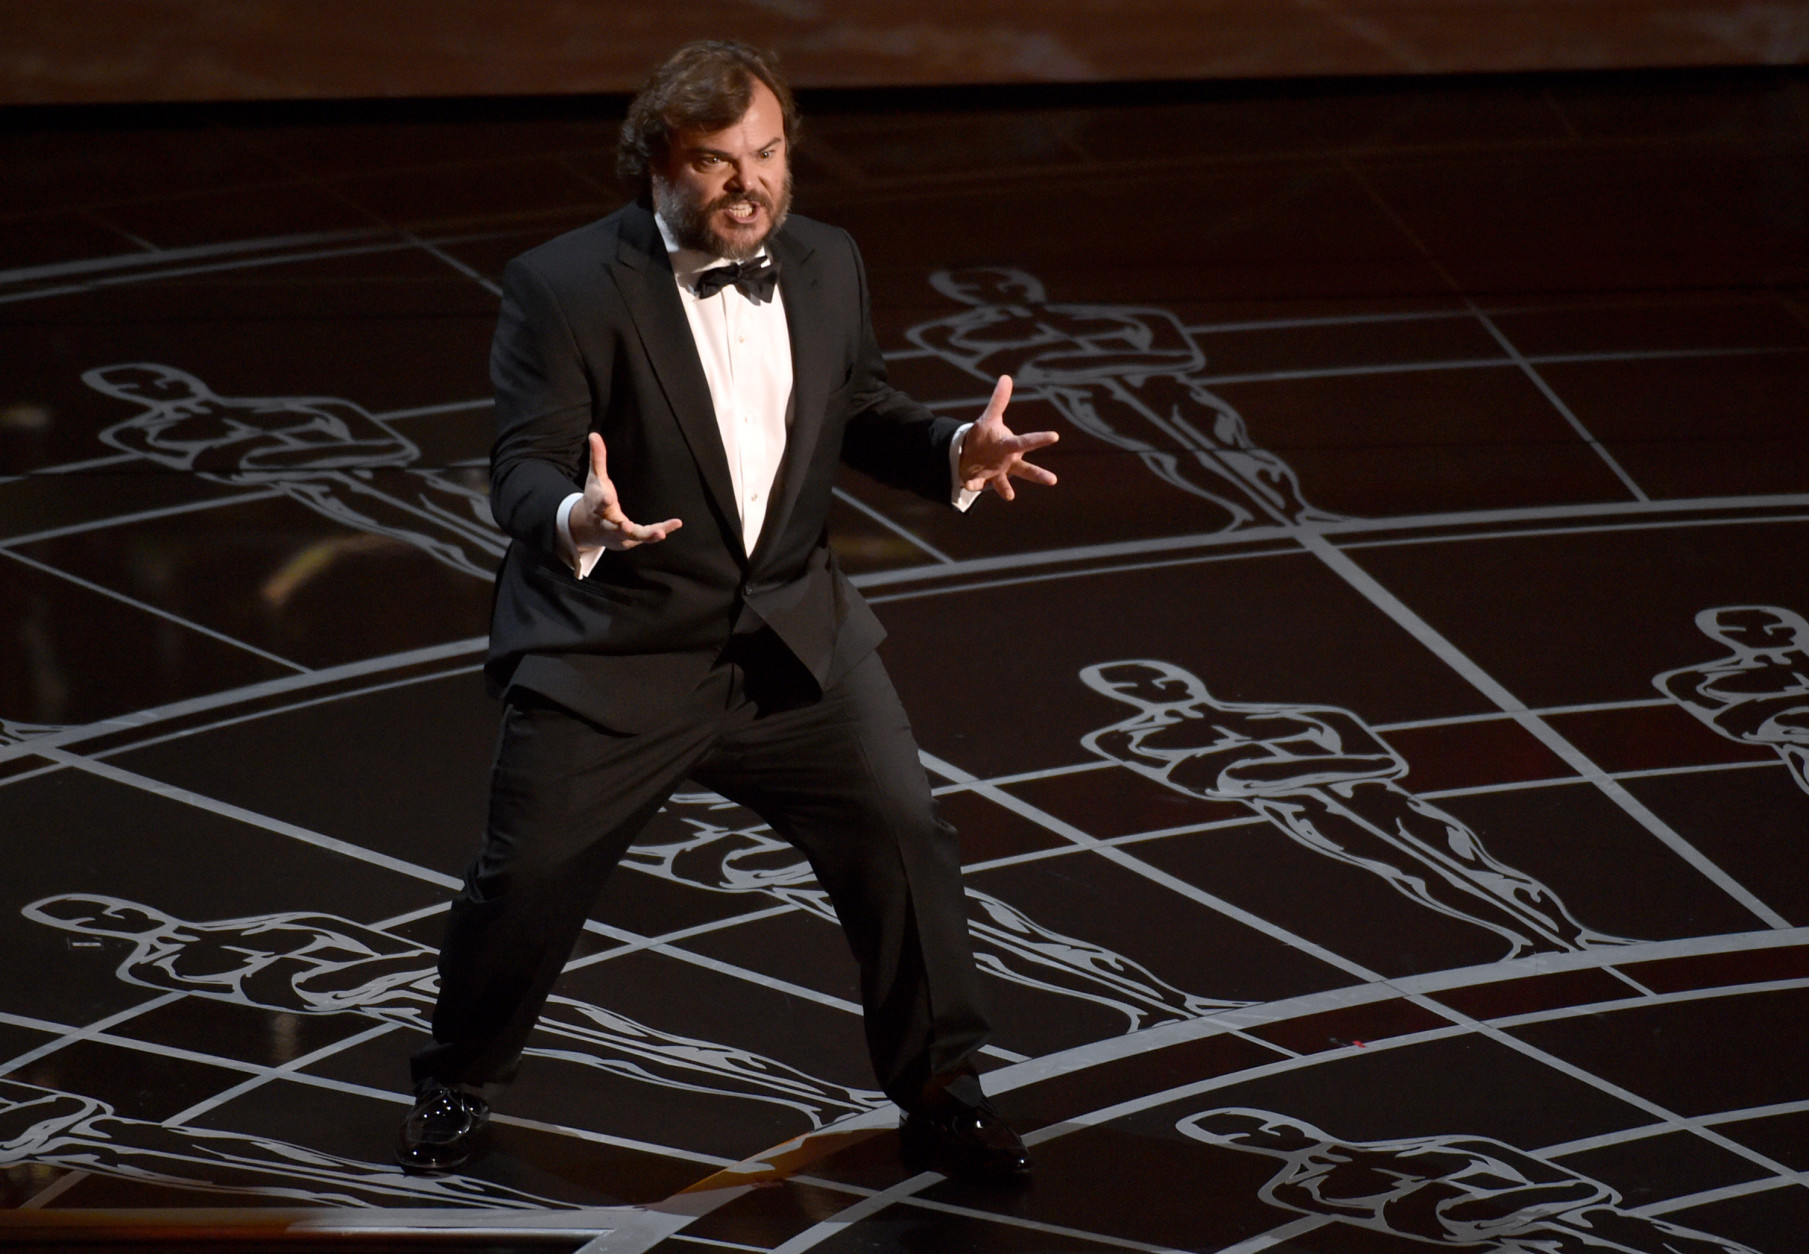 Jack Black performs at the Oscars on Sunday, Feb. 22, 2015, at the Dolby Theatre in Los Angeles. (Photo by John Shearer/Invision/AP)